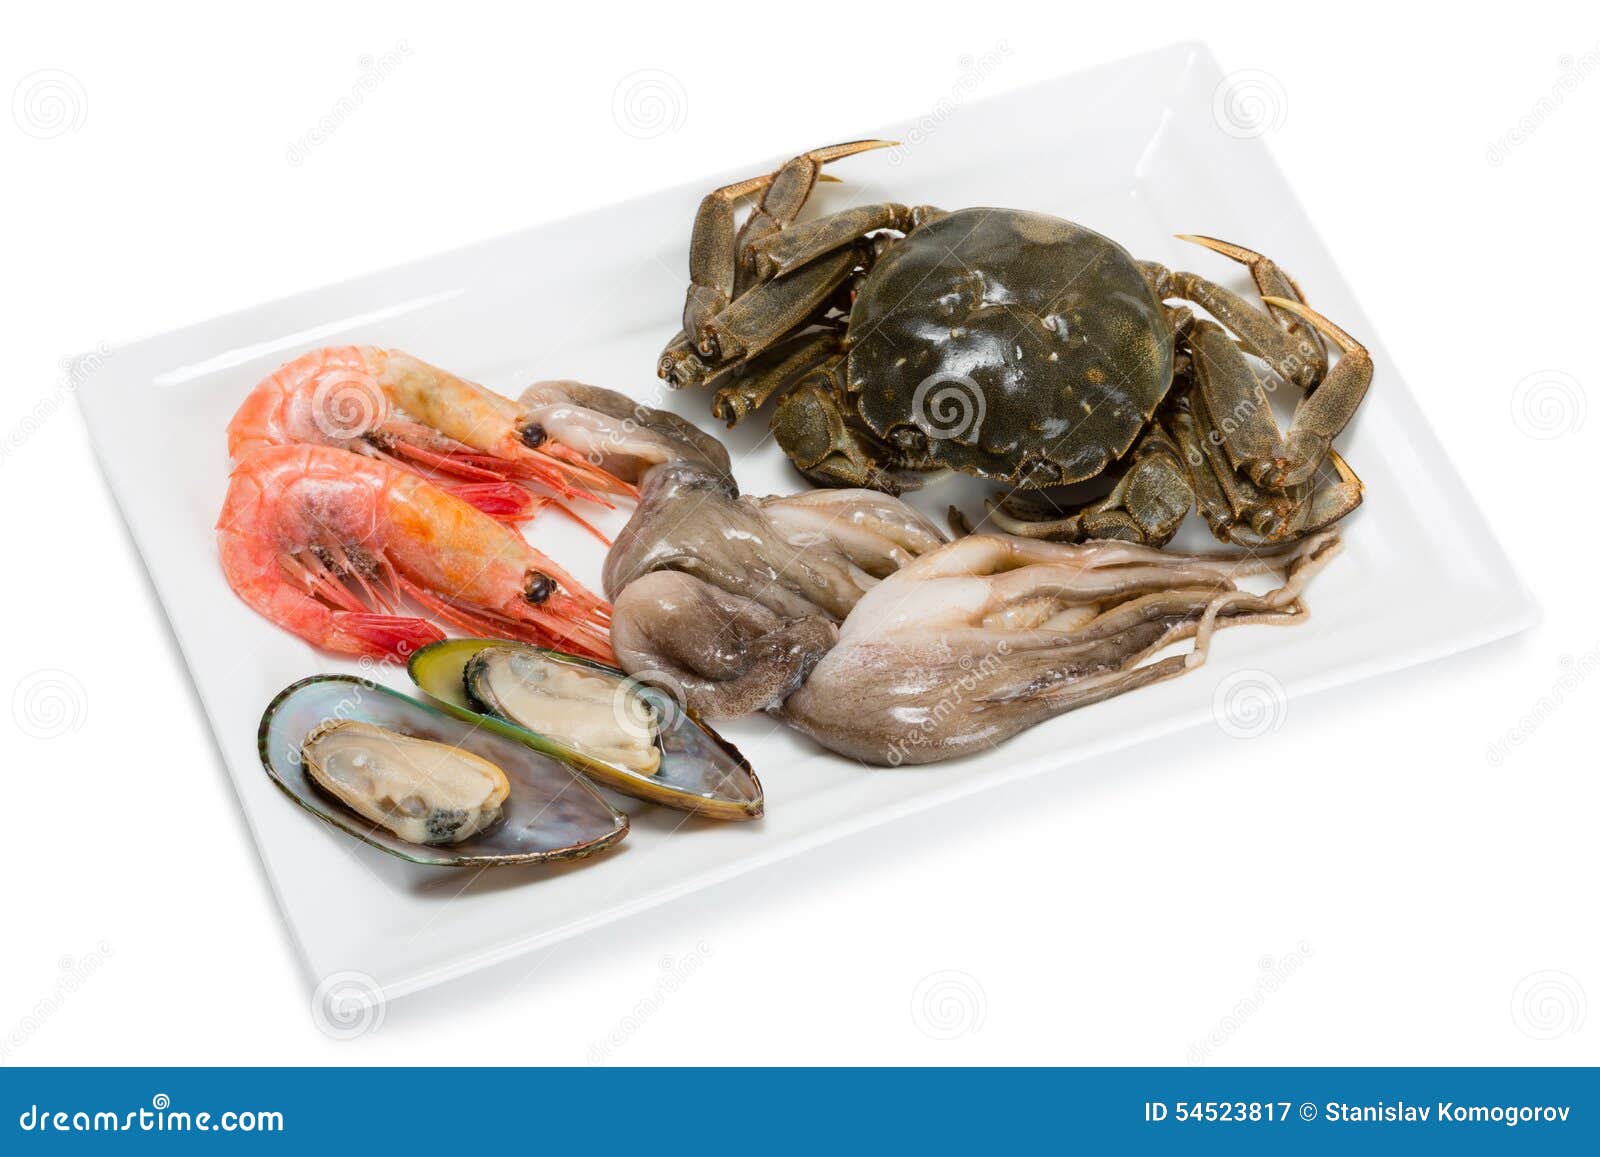 Fresh raw crab, small octopus, shrimp and mussels for the preparation of various seafood dishes. From a series of Food Korean cuisine.